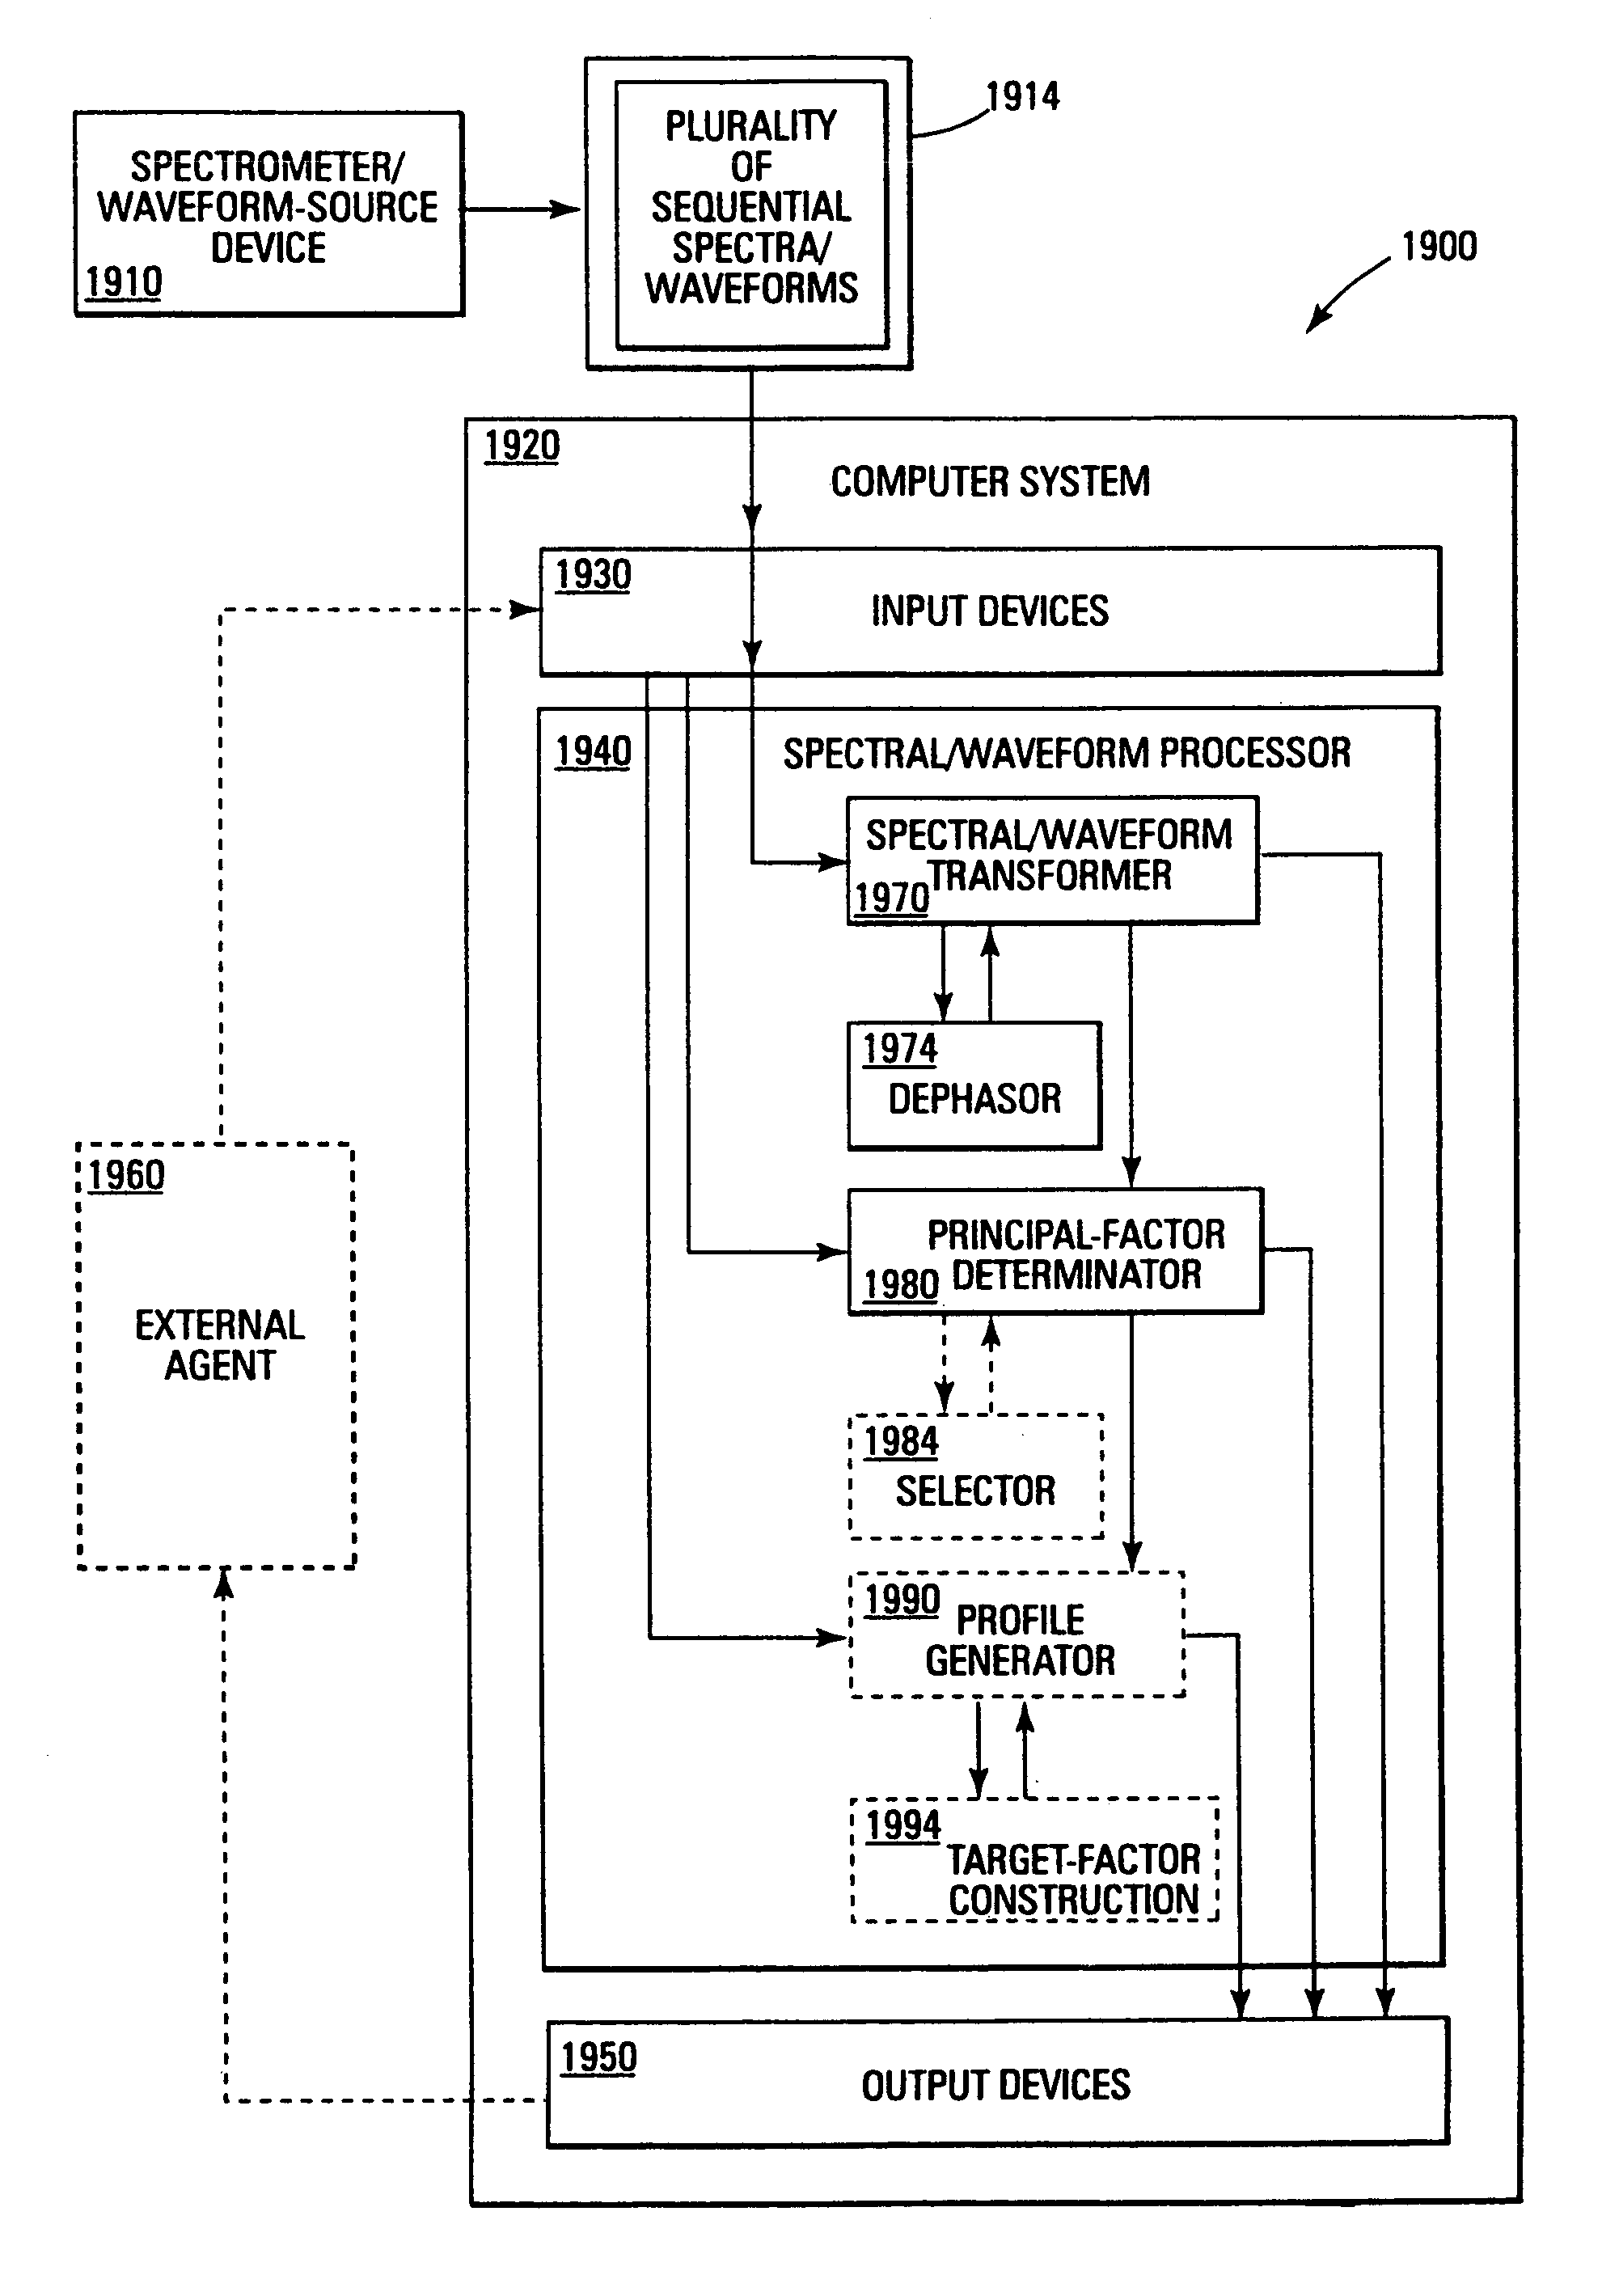 Method and apparatus for compensating waveforms, spectra, and profiles derived therefrom for effects of drift